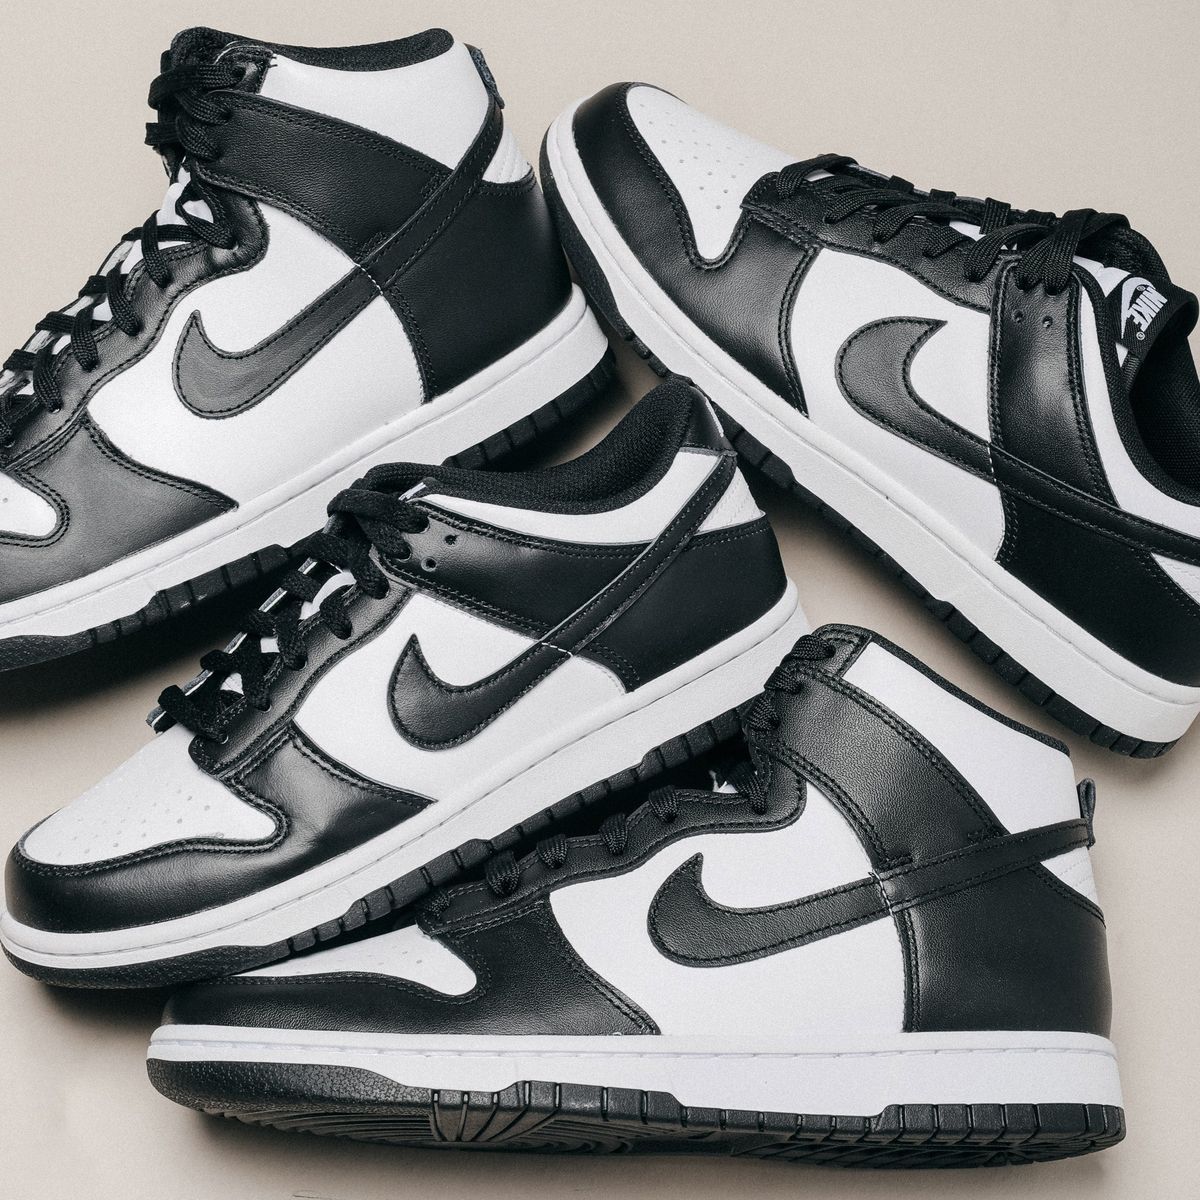 How Dunks Became One the Most Popular Sneakers